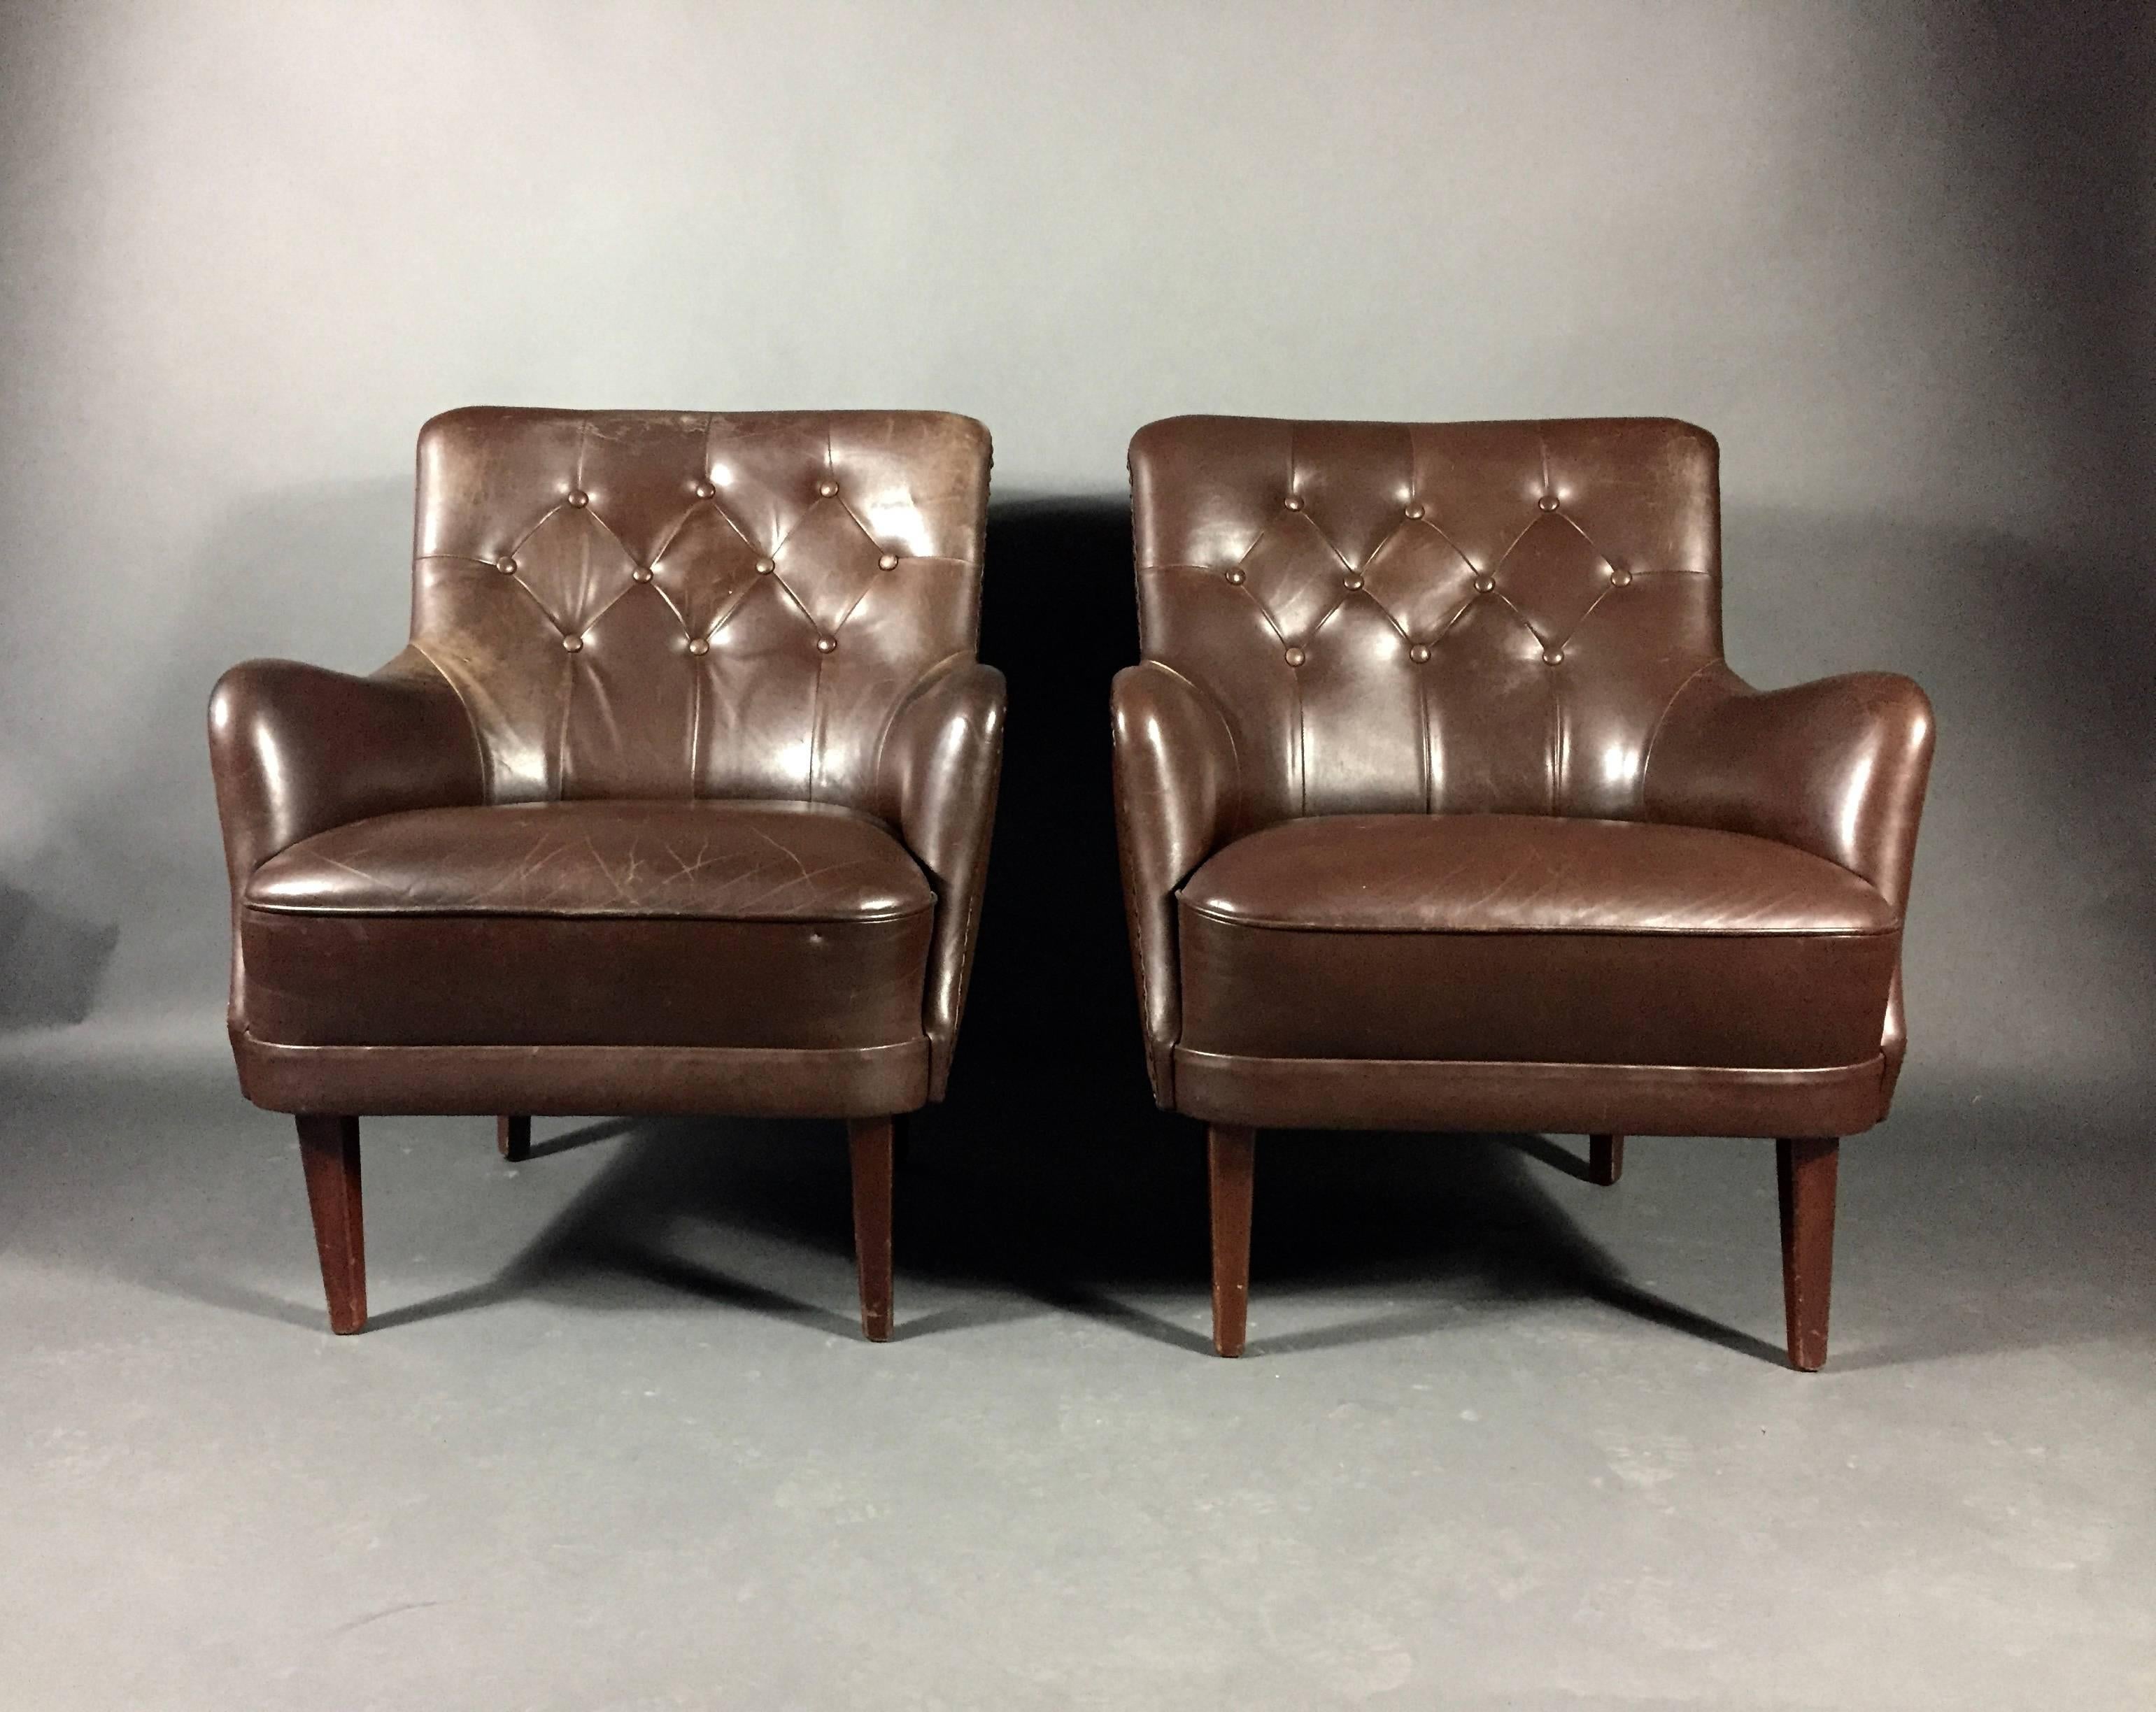 A perfect pair of armchairs upholstered in brown buttoned leather, tapered legs in stained beech by Danish furniture designer in the 1950s. Minor wear to leather very nice condition.